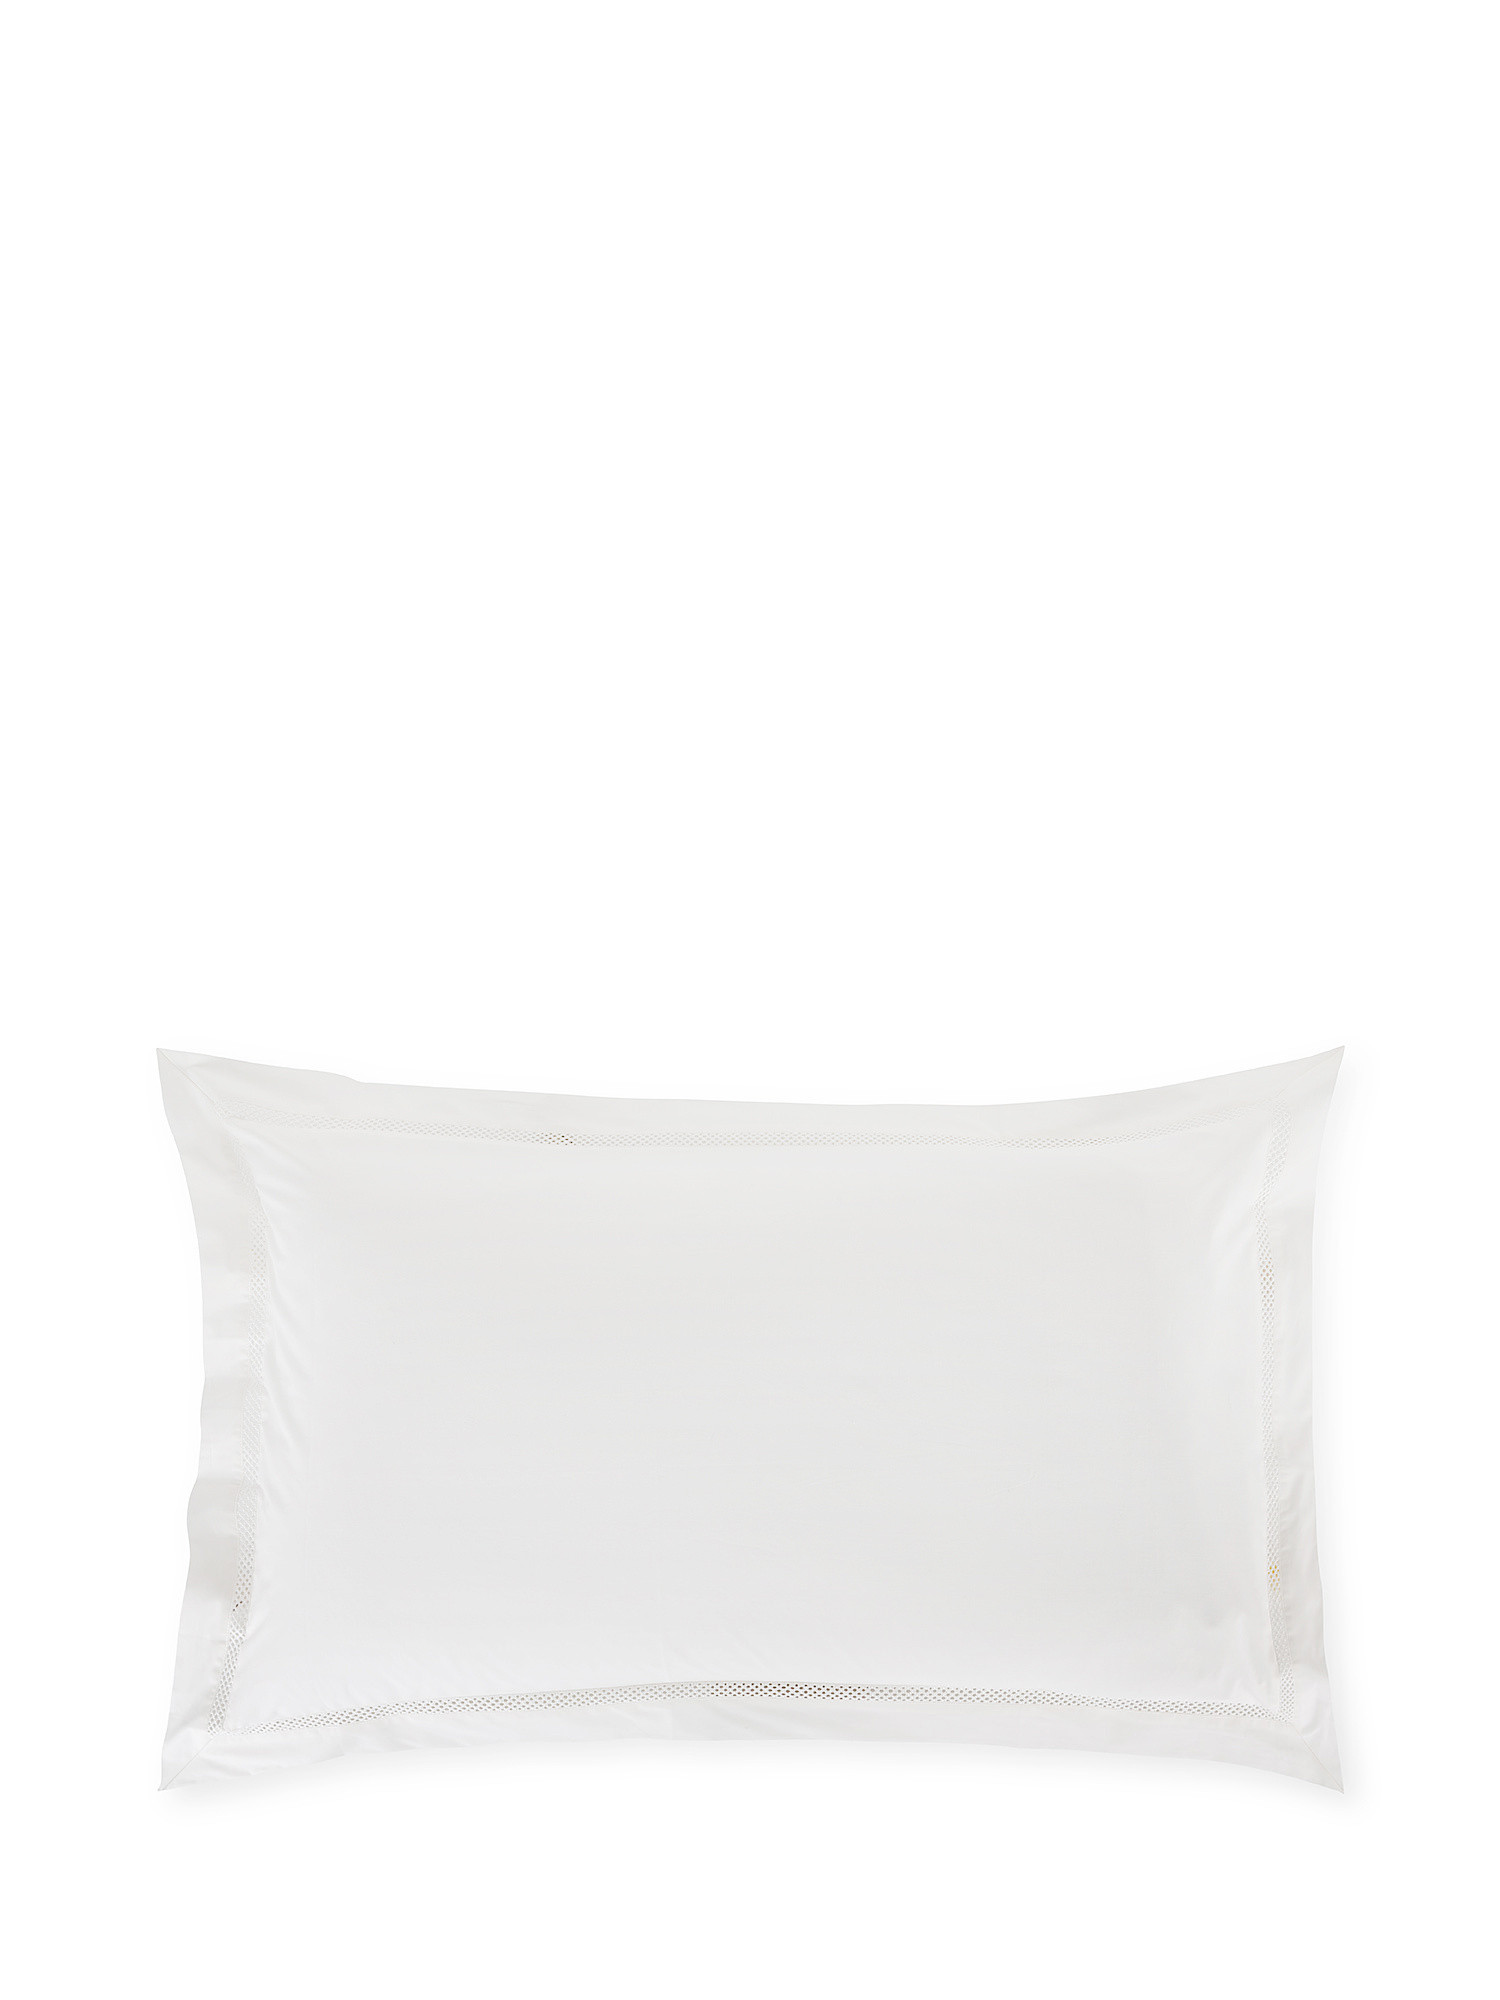 Portofino pillowcase in 100% cotton percale with drawn thread work, Beige, large image number 0